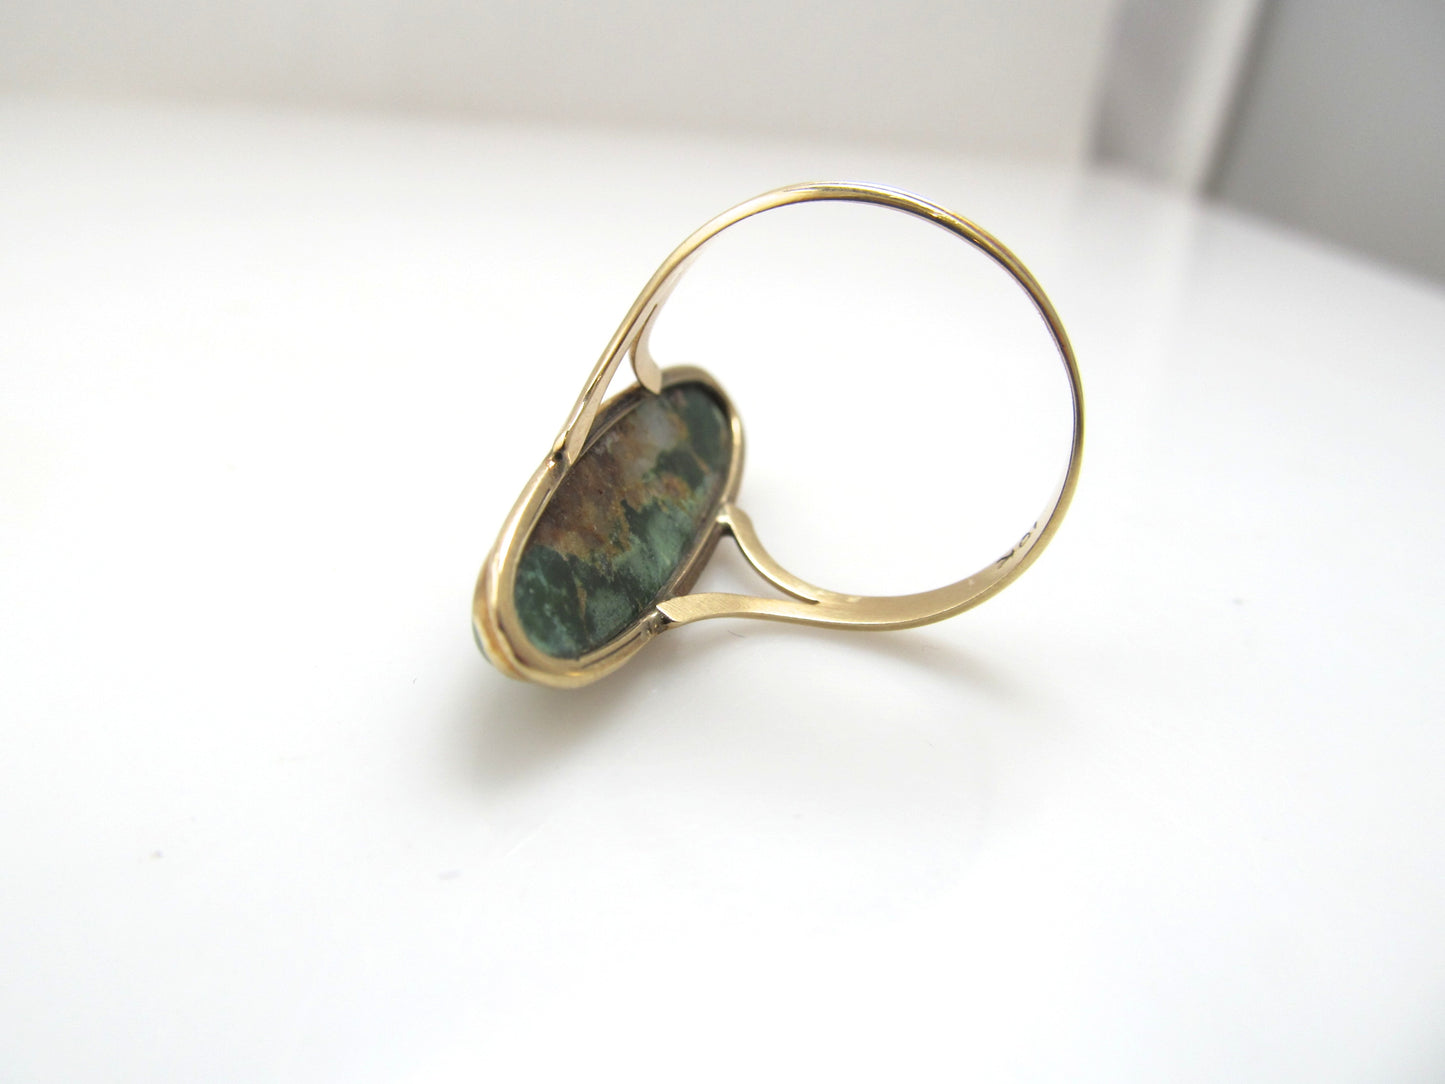 Antique yellow gold ring with natural turquoise, circa 1910